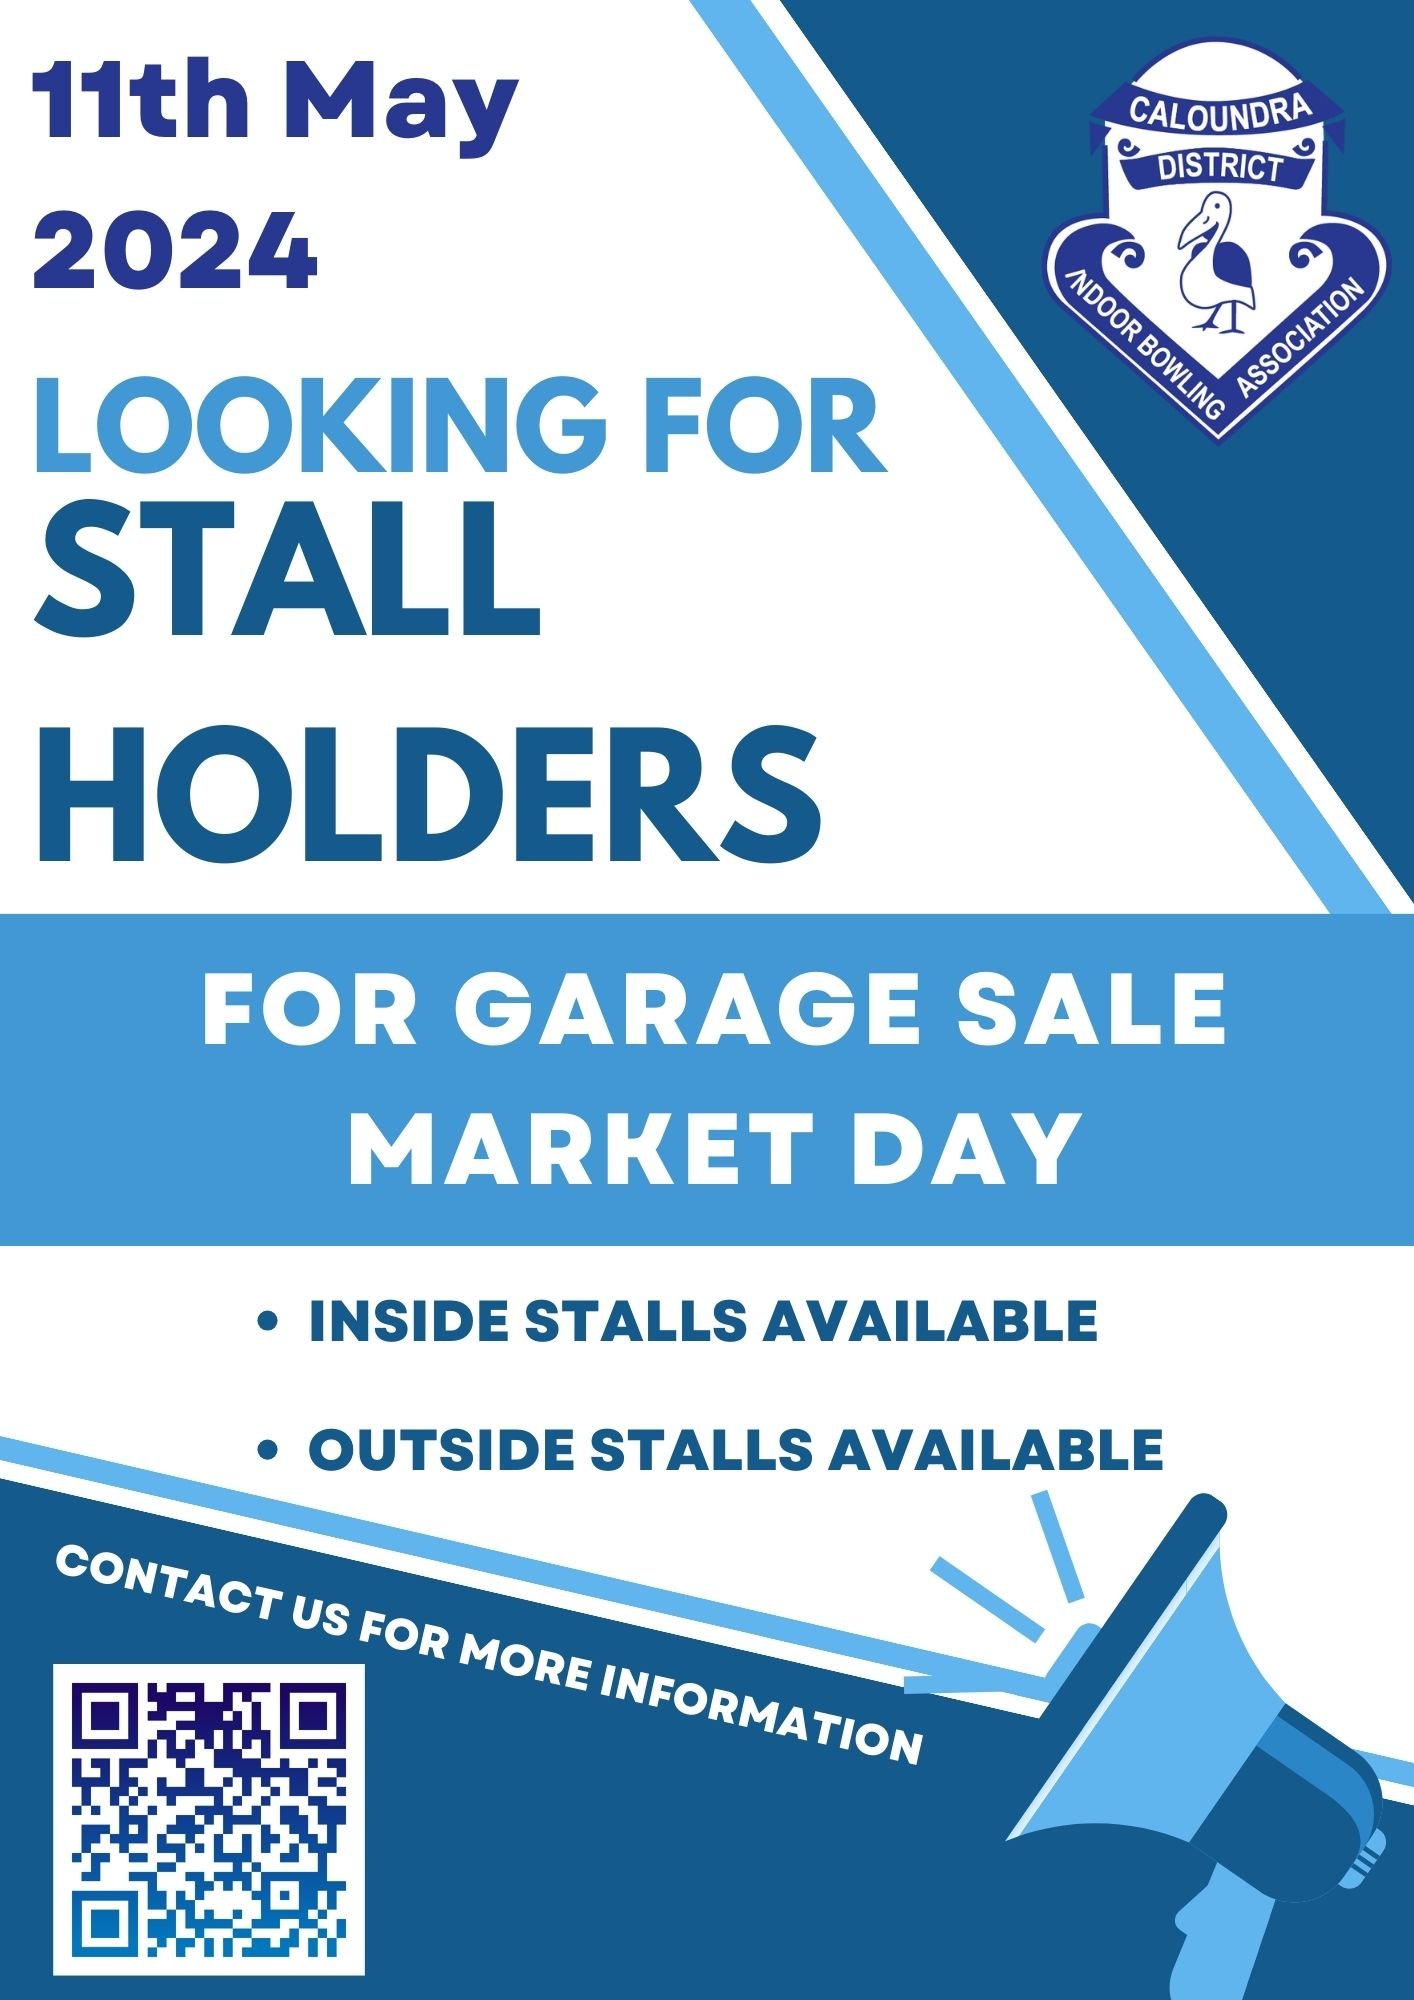 stall holders wanted.jpg